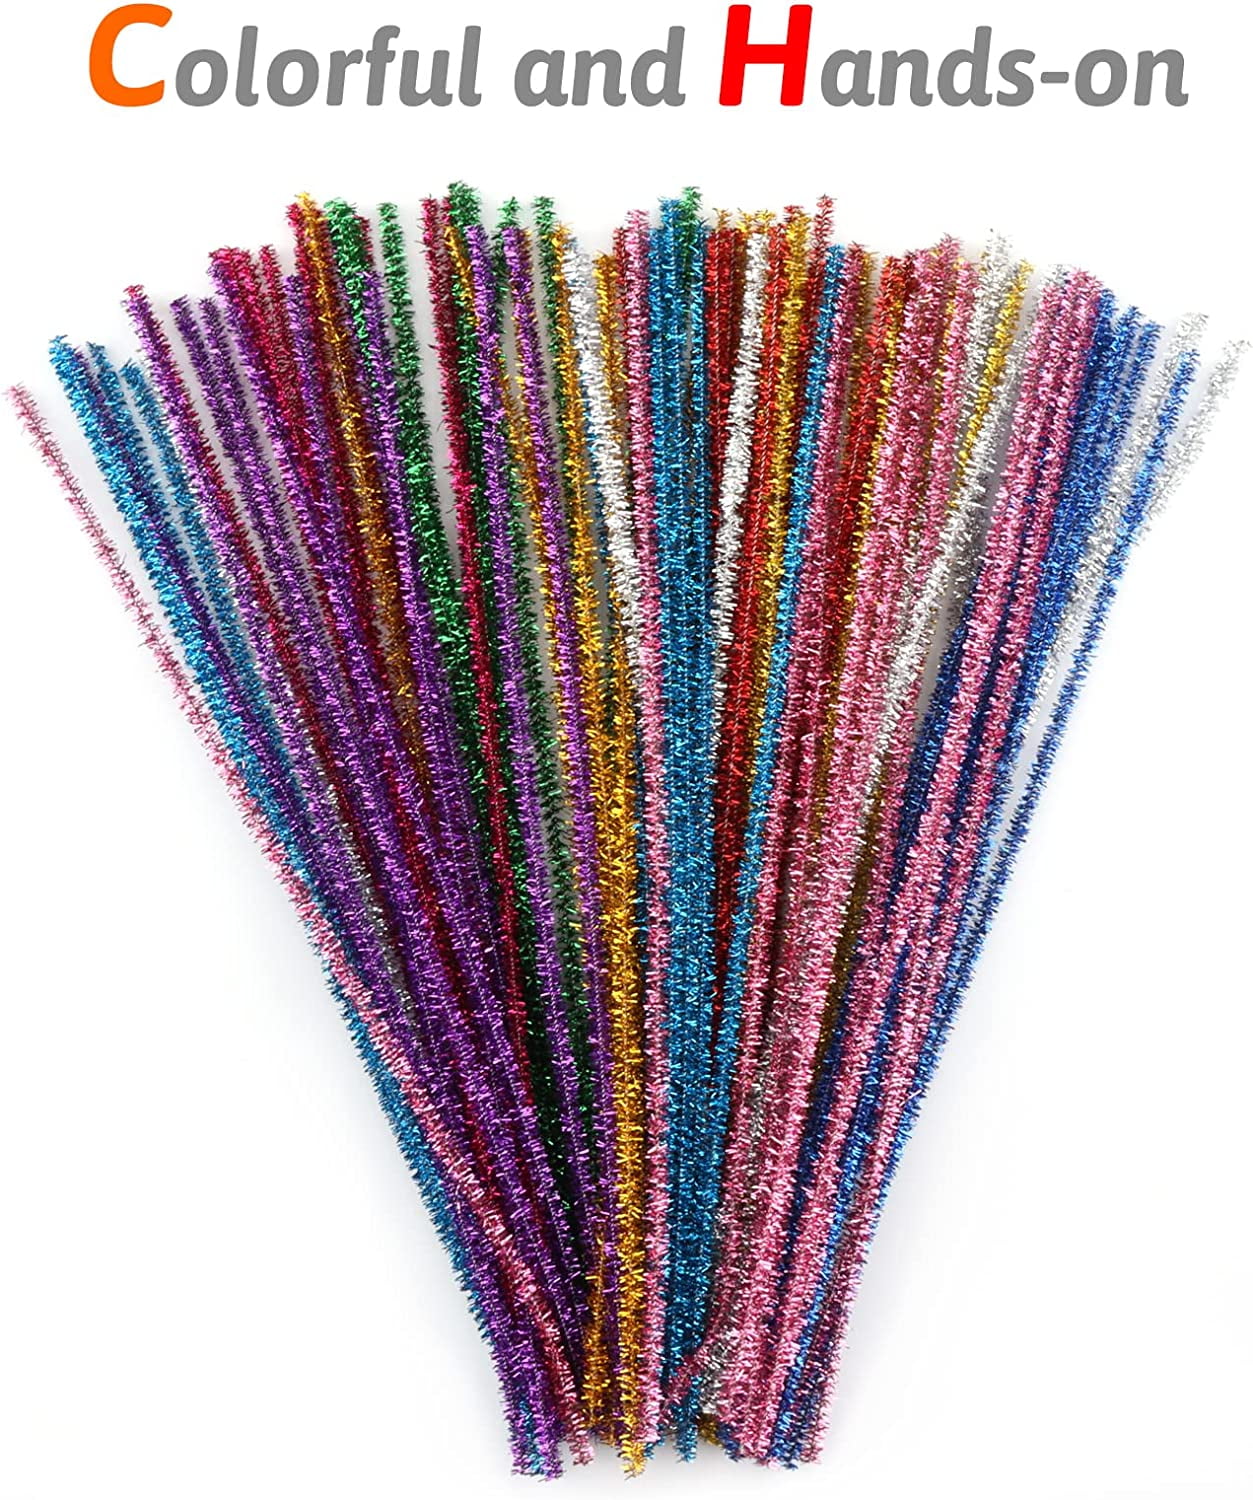 Buy Pipe Cleaners Bulk 12 Inch Chenille Stem Set of 300 Fuzzy